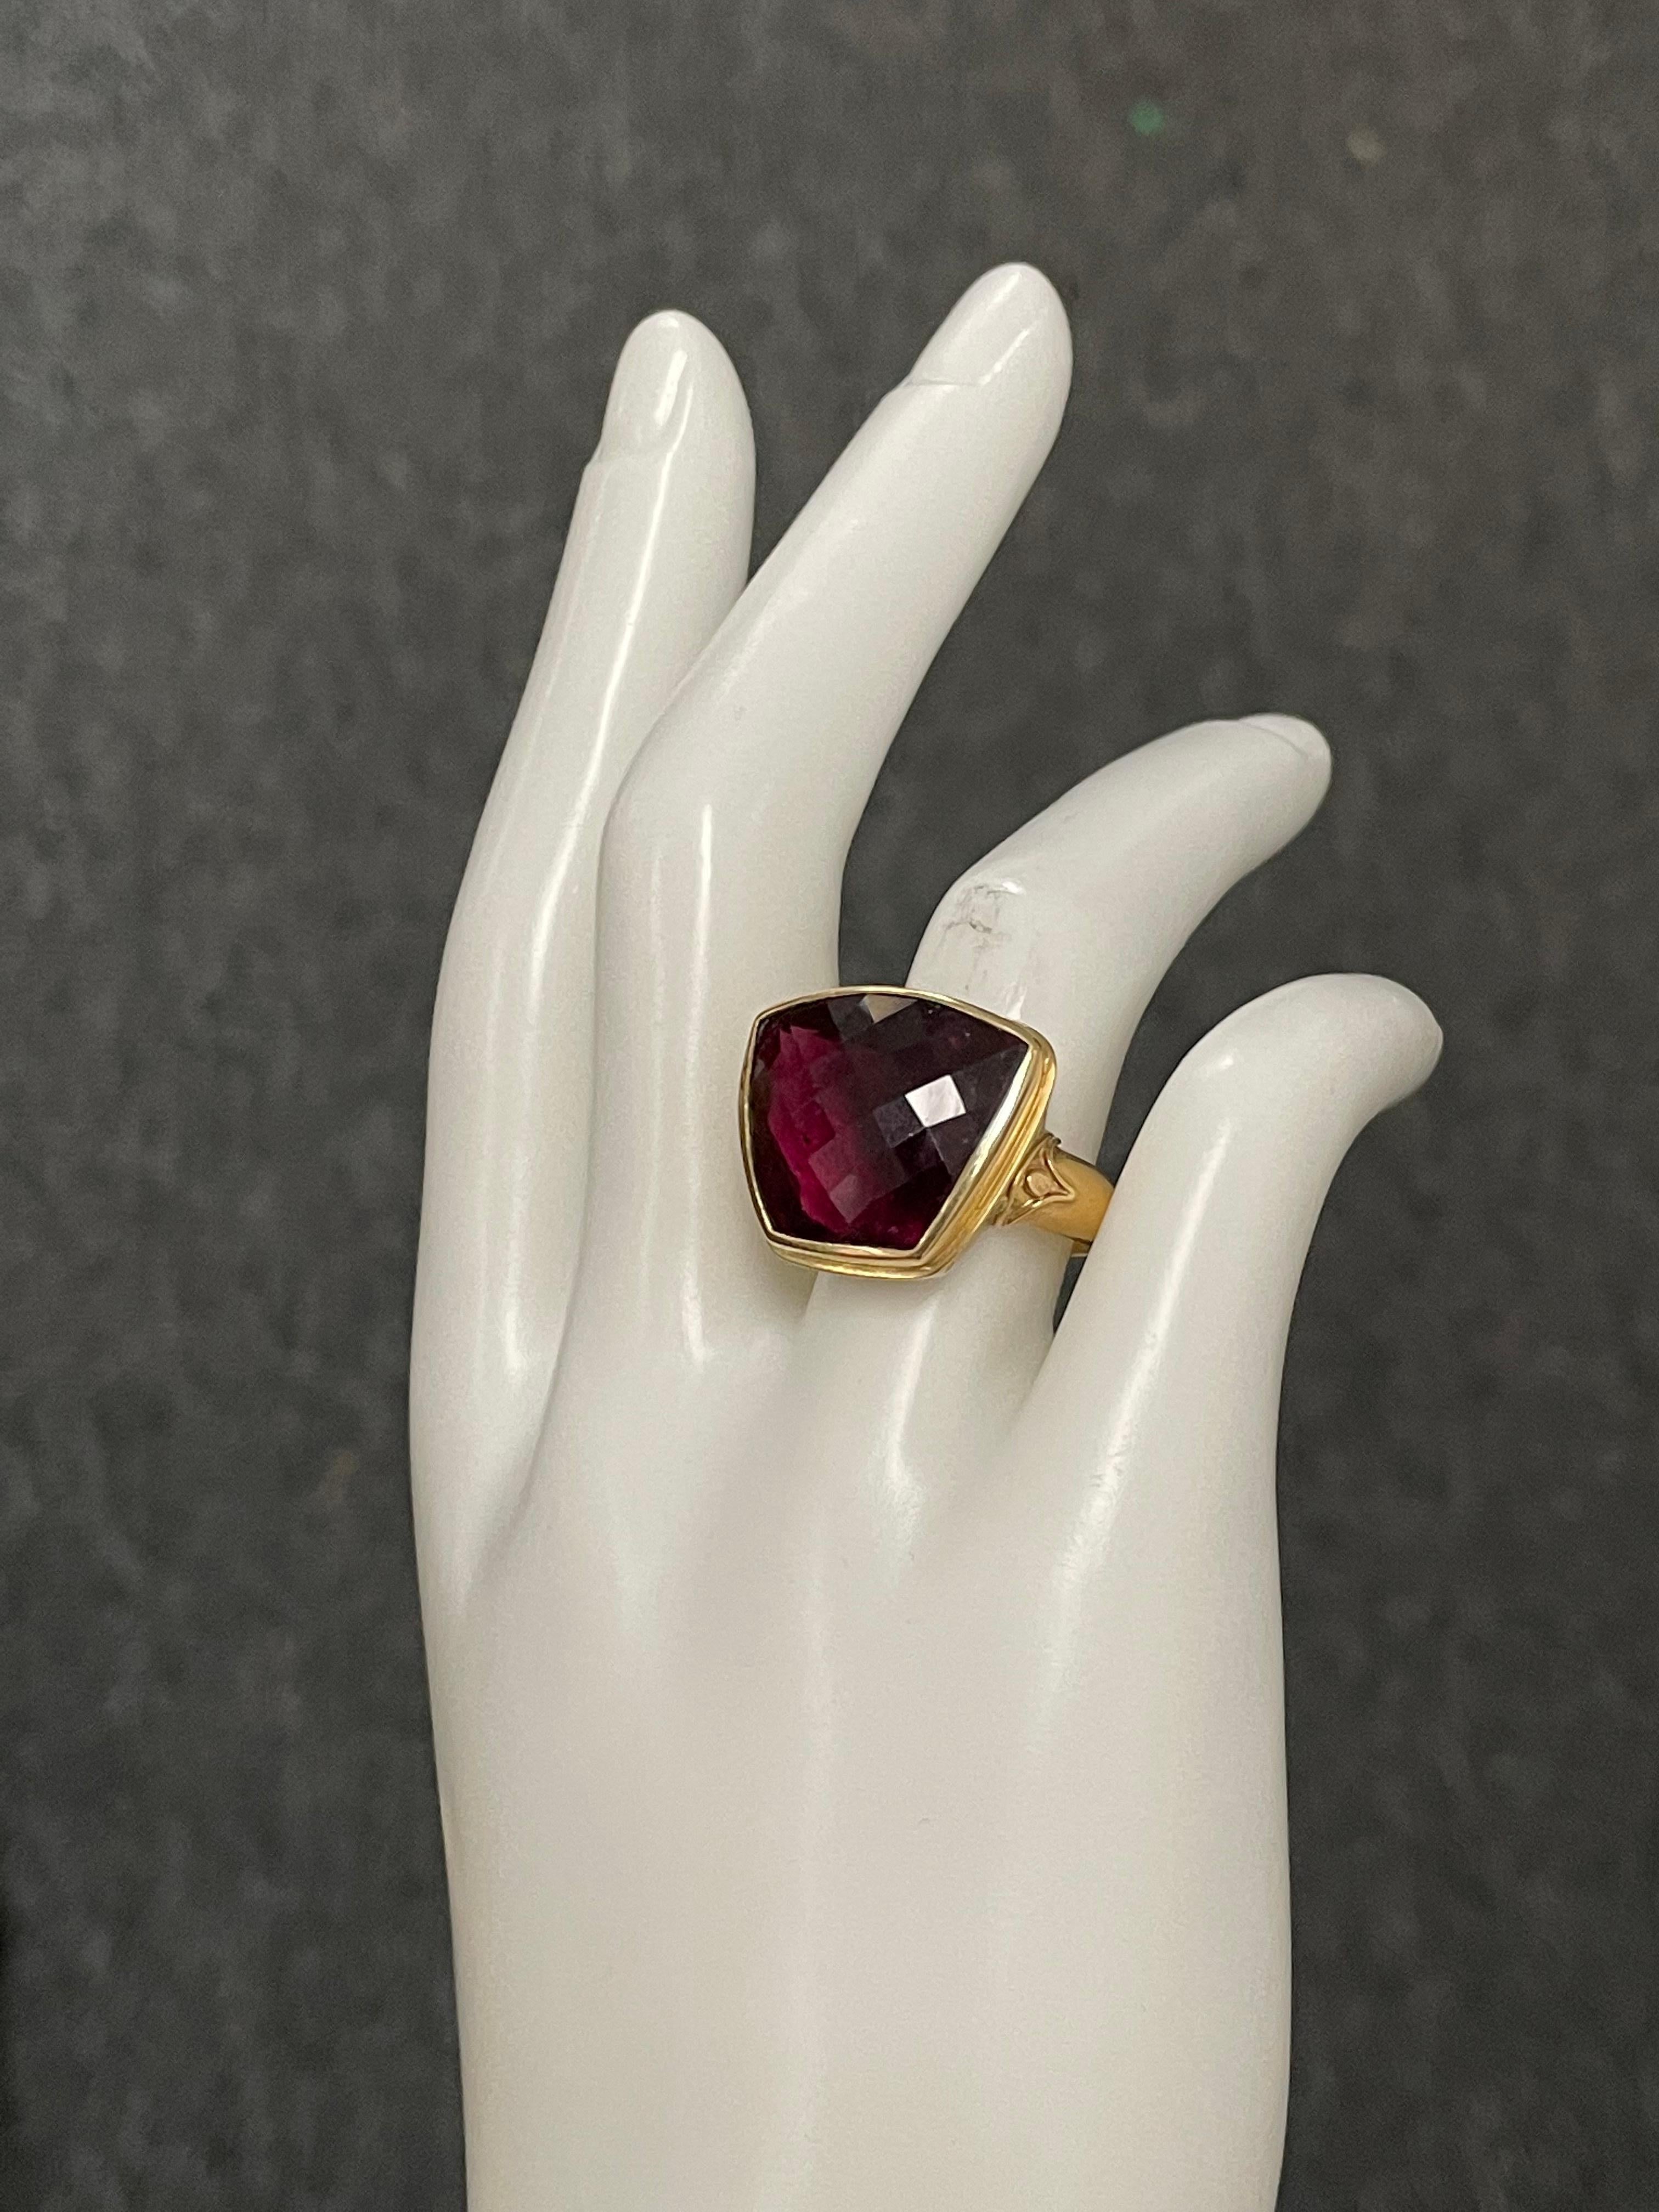 21.4 Carat Pink Tourmaline 18k Gold Ring In New Condition For Sale In Soquel, CA